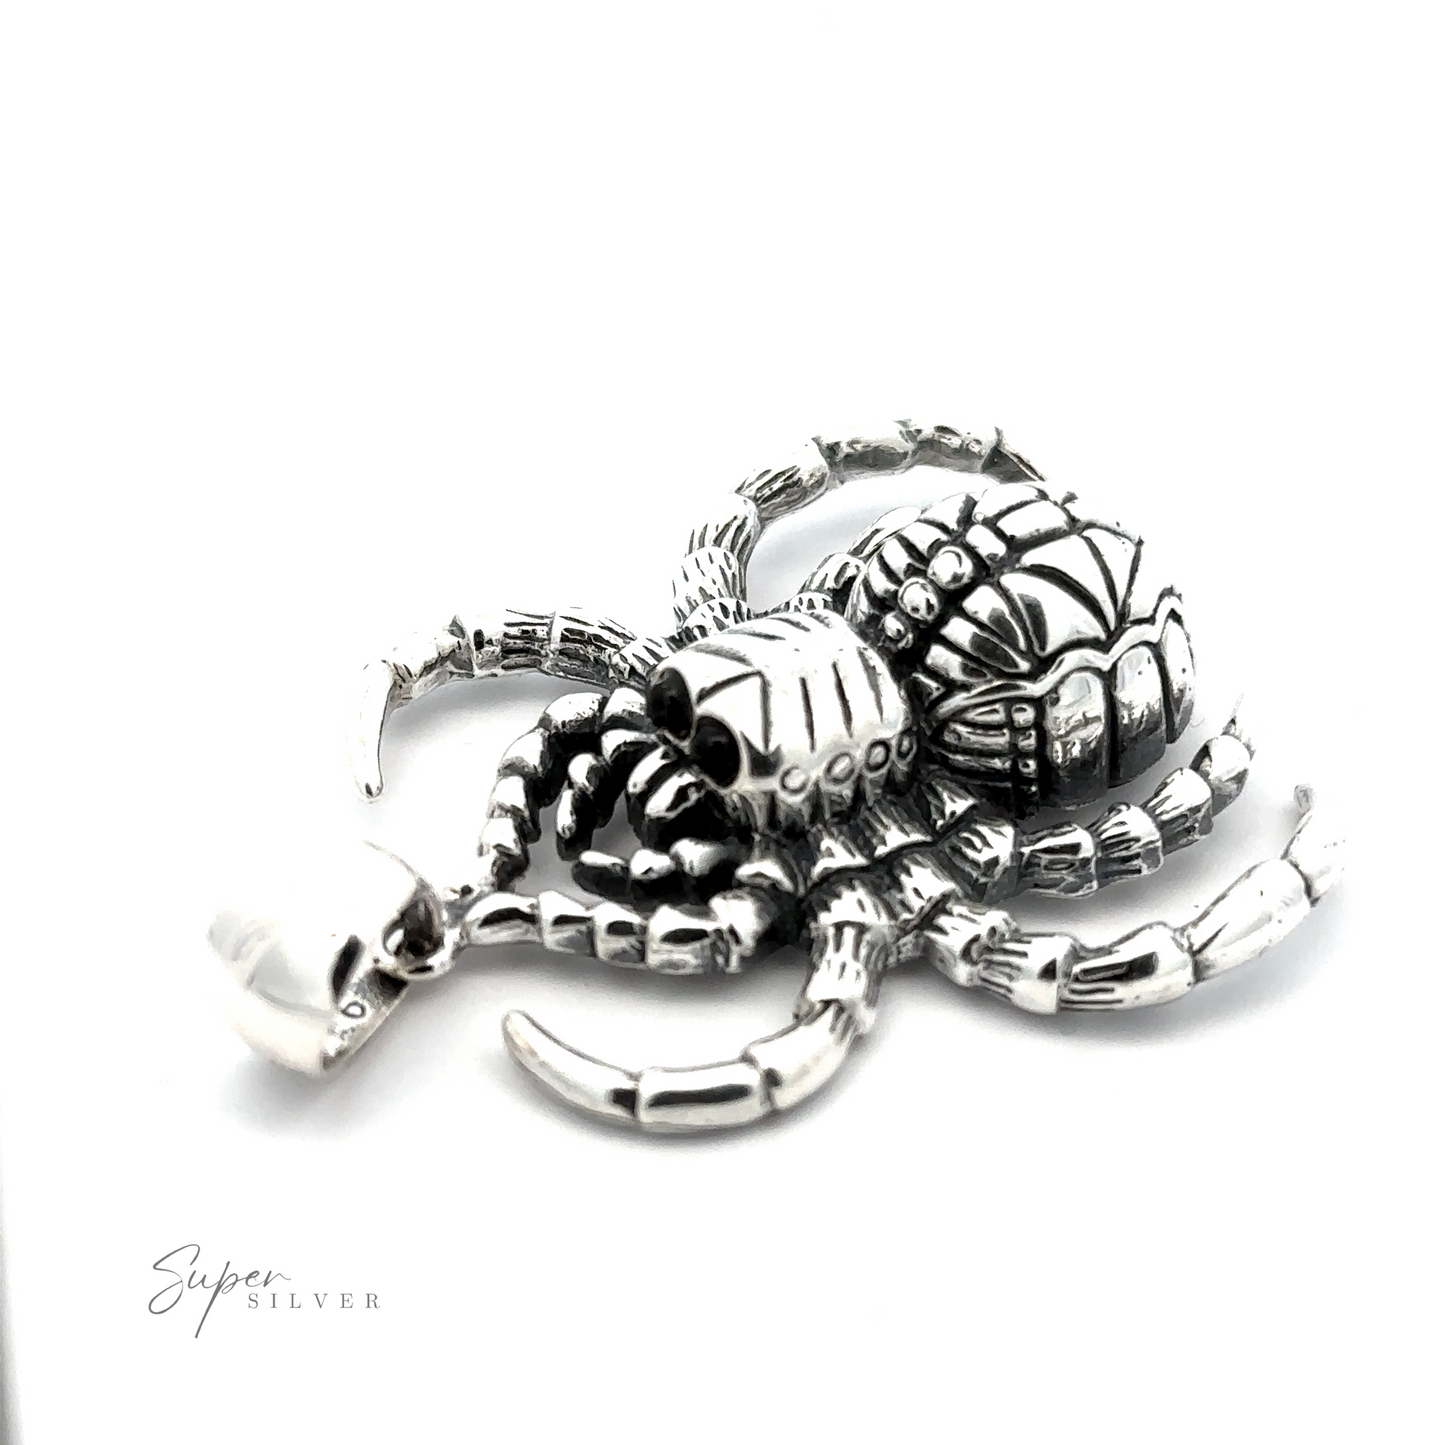 A silver, handcrafted Large Spider Pendant with detailed designs on its body and legs, displayed on a white background. Made from .925 Sterling Silver, it has the text "Super Silver" in the lower-left corner.